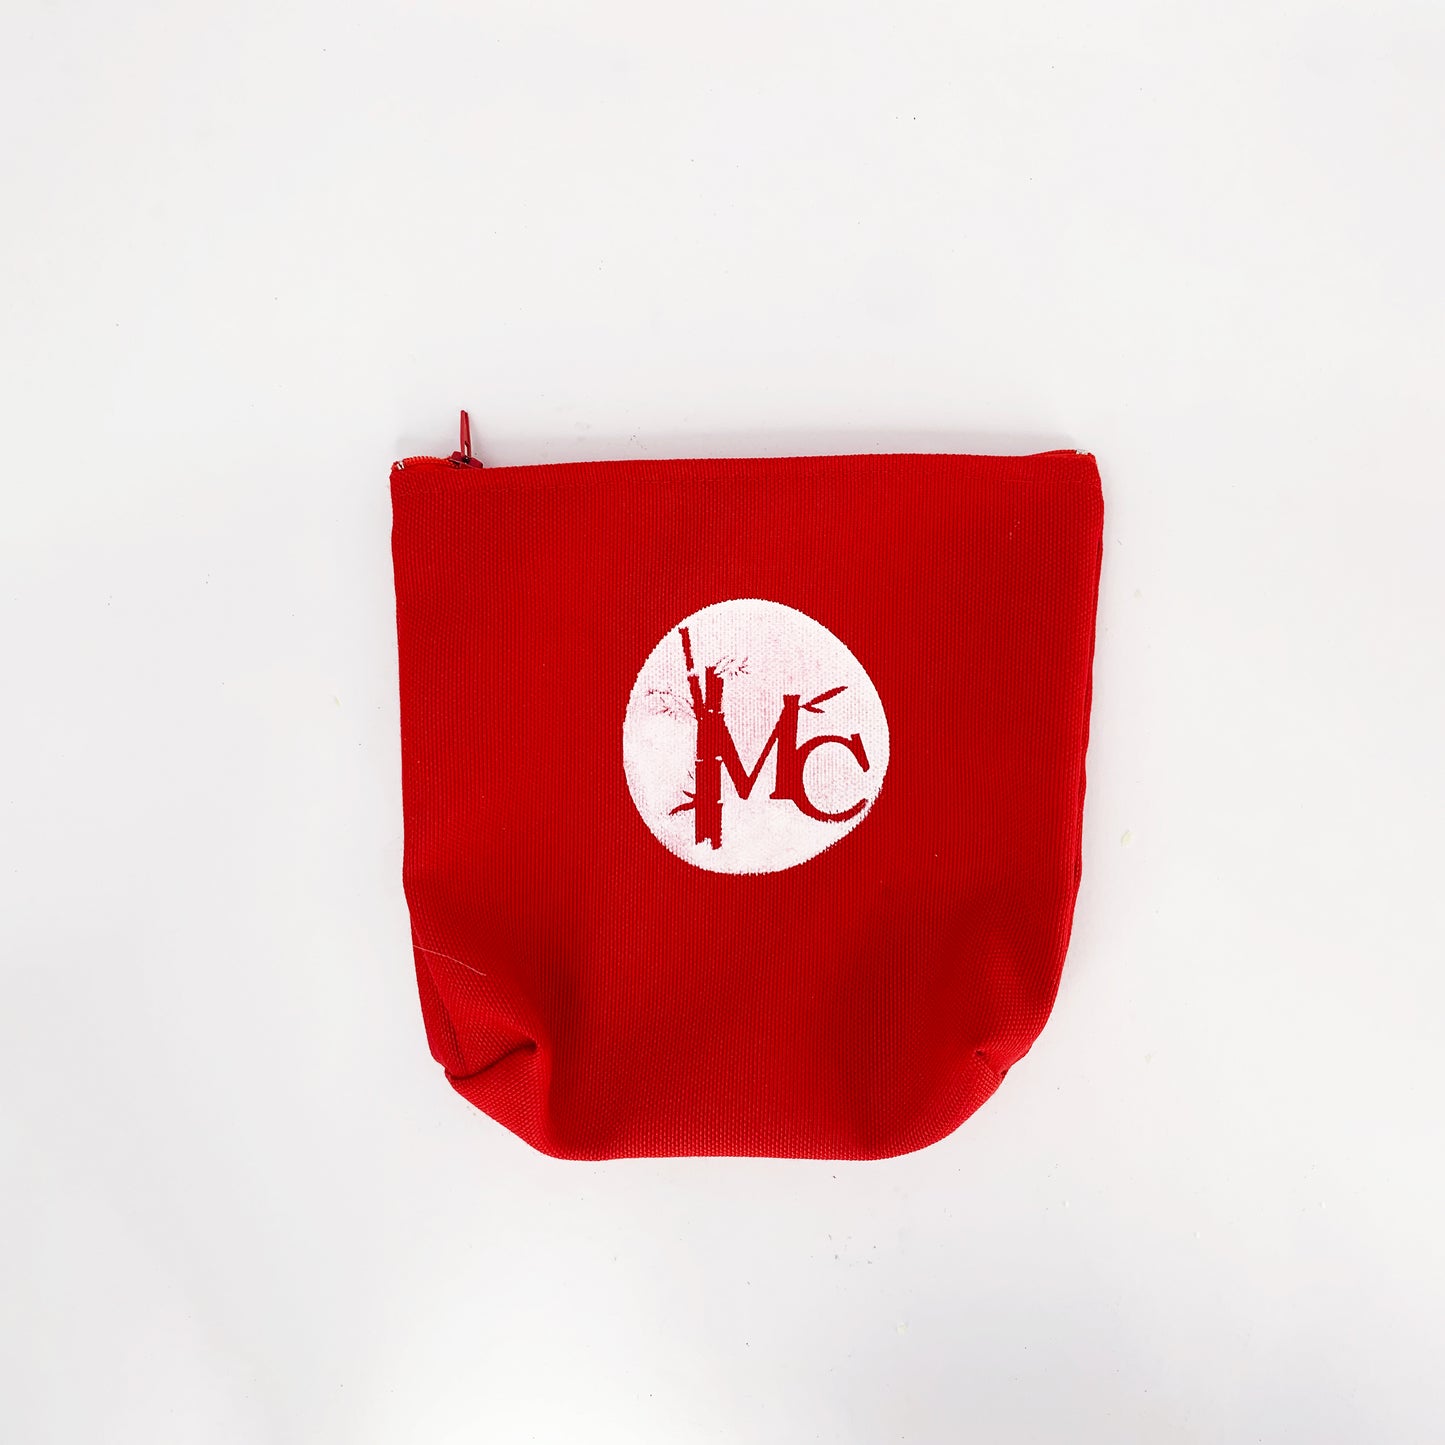 MC Pouch in Red by Morgan's Creek